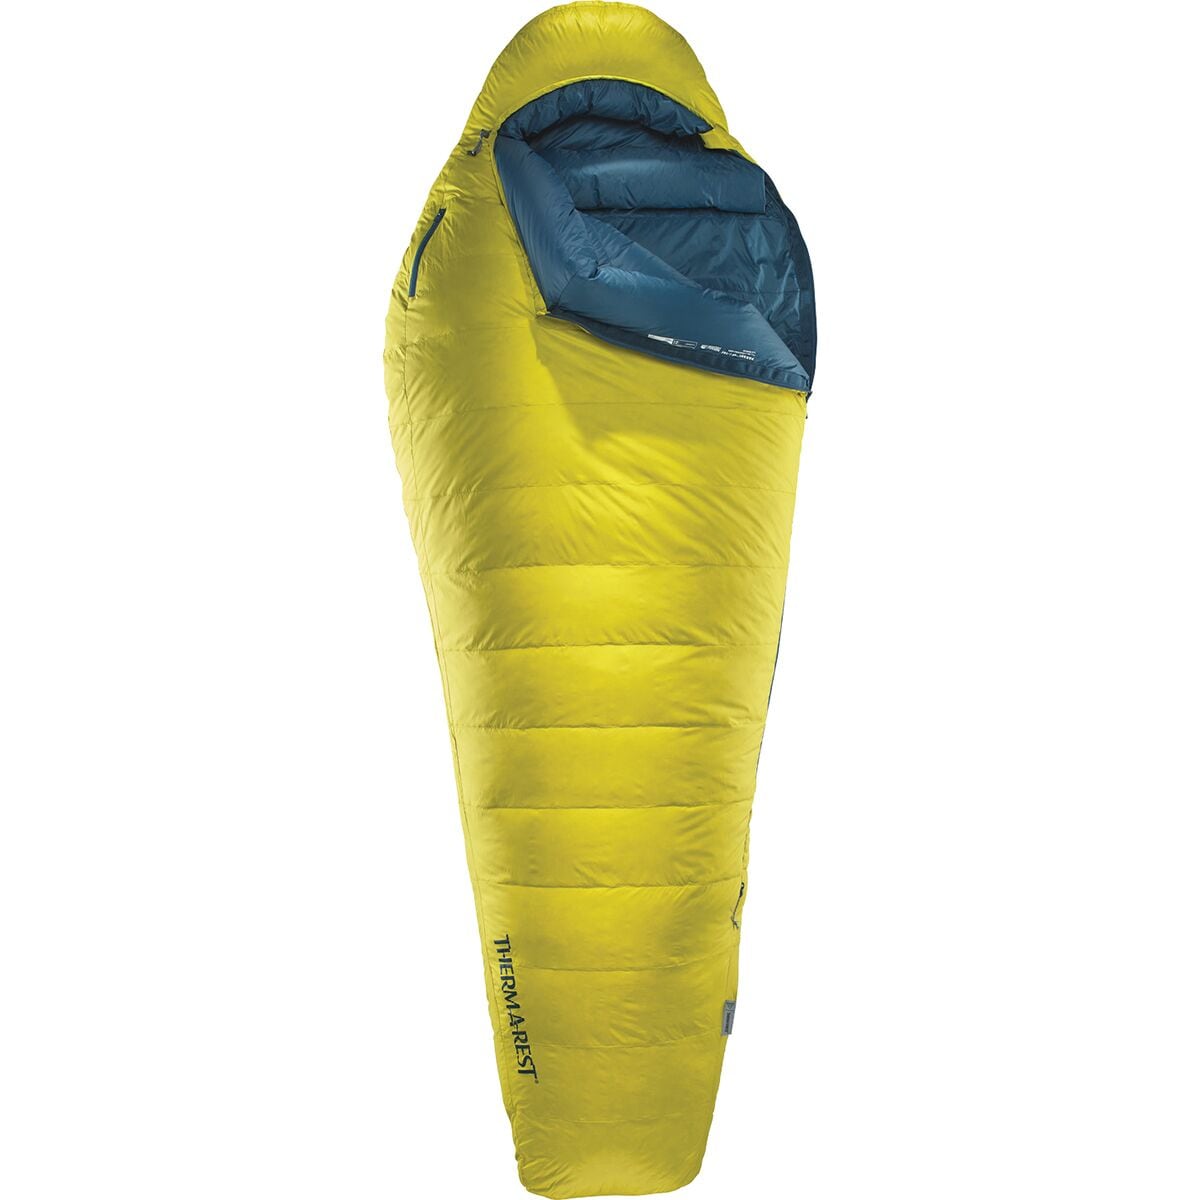 Therm-a-Rest Parsec Sleeping Bag: 0F Down